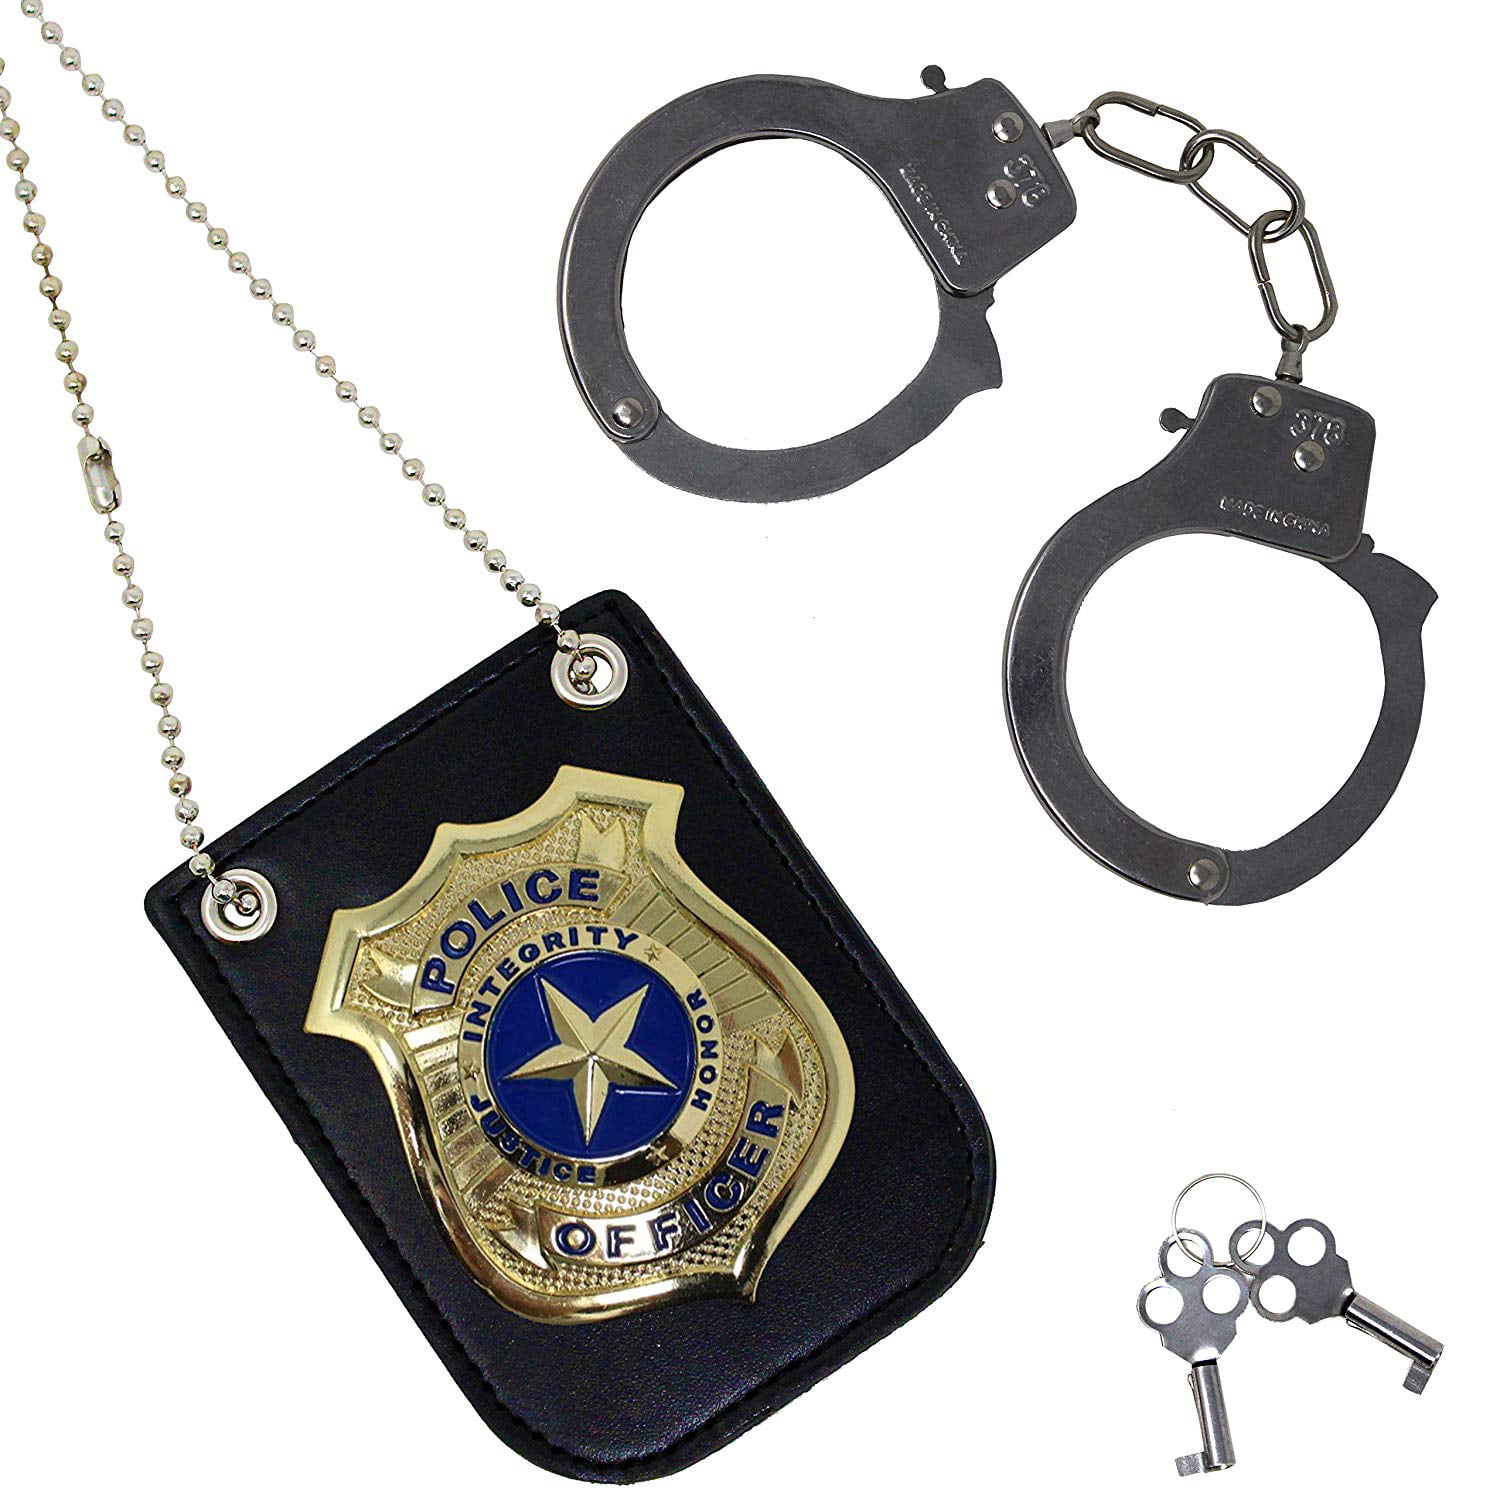 Windy City Novelties Glow in The Dark Police Toy Handcuffs 12 Pack 